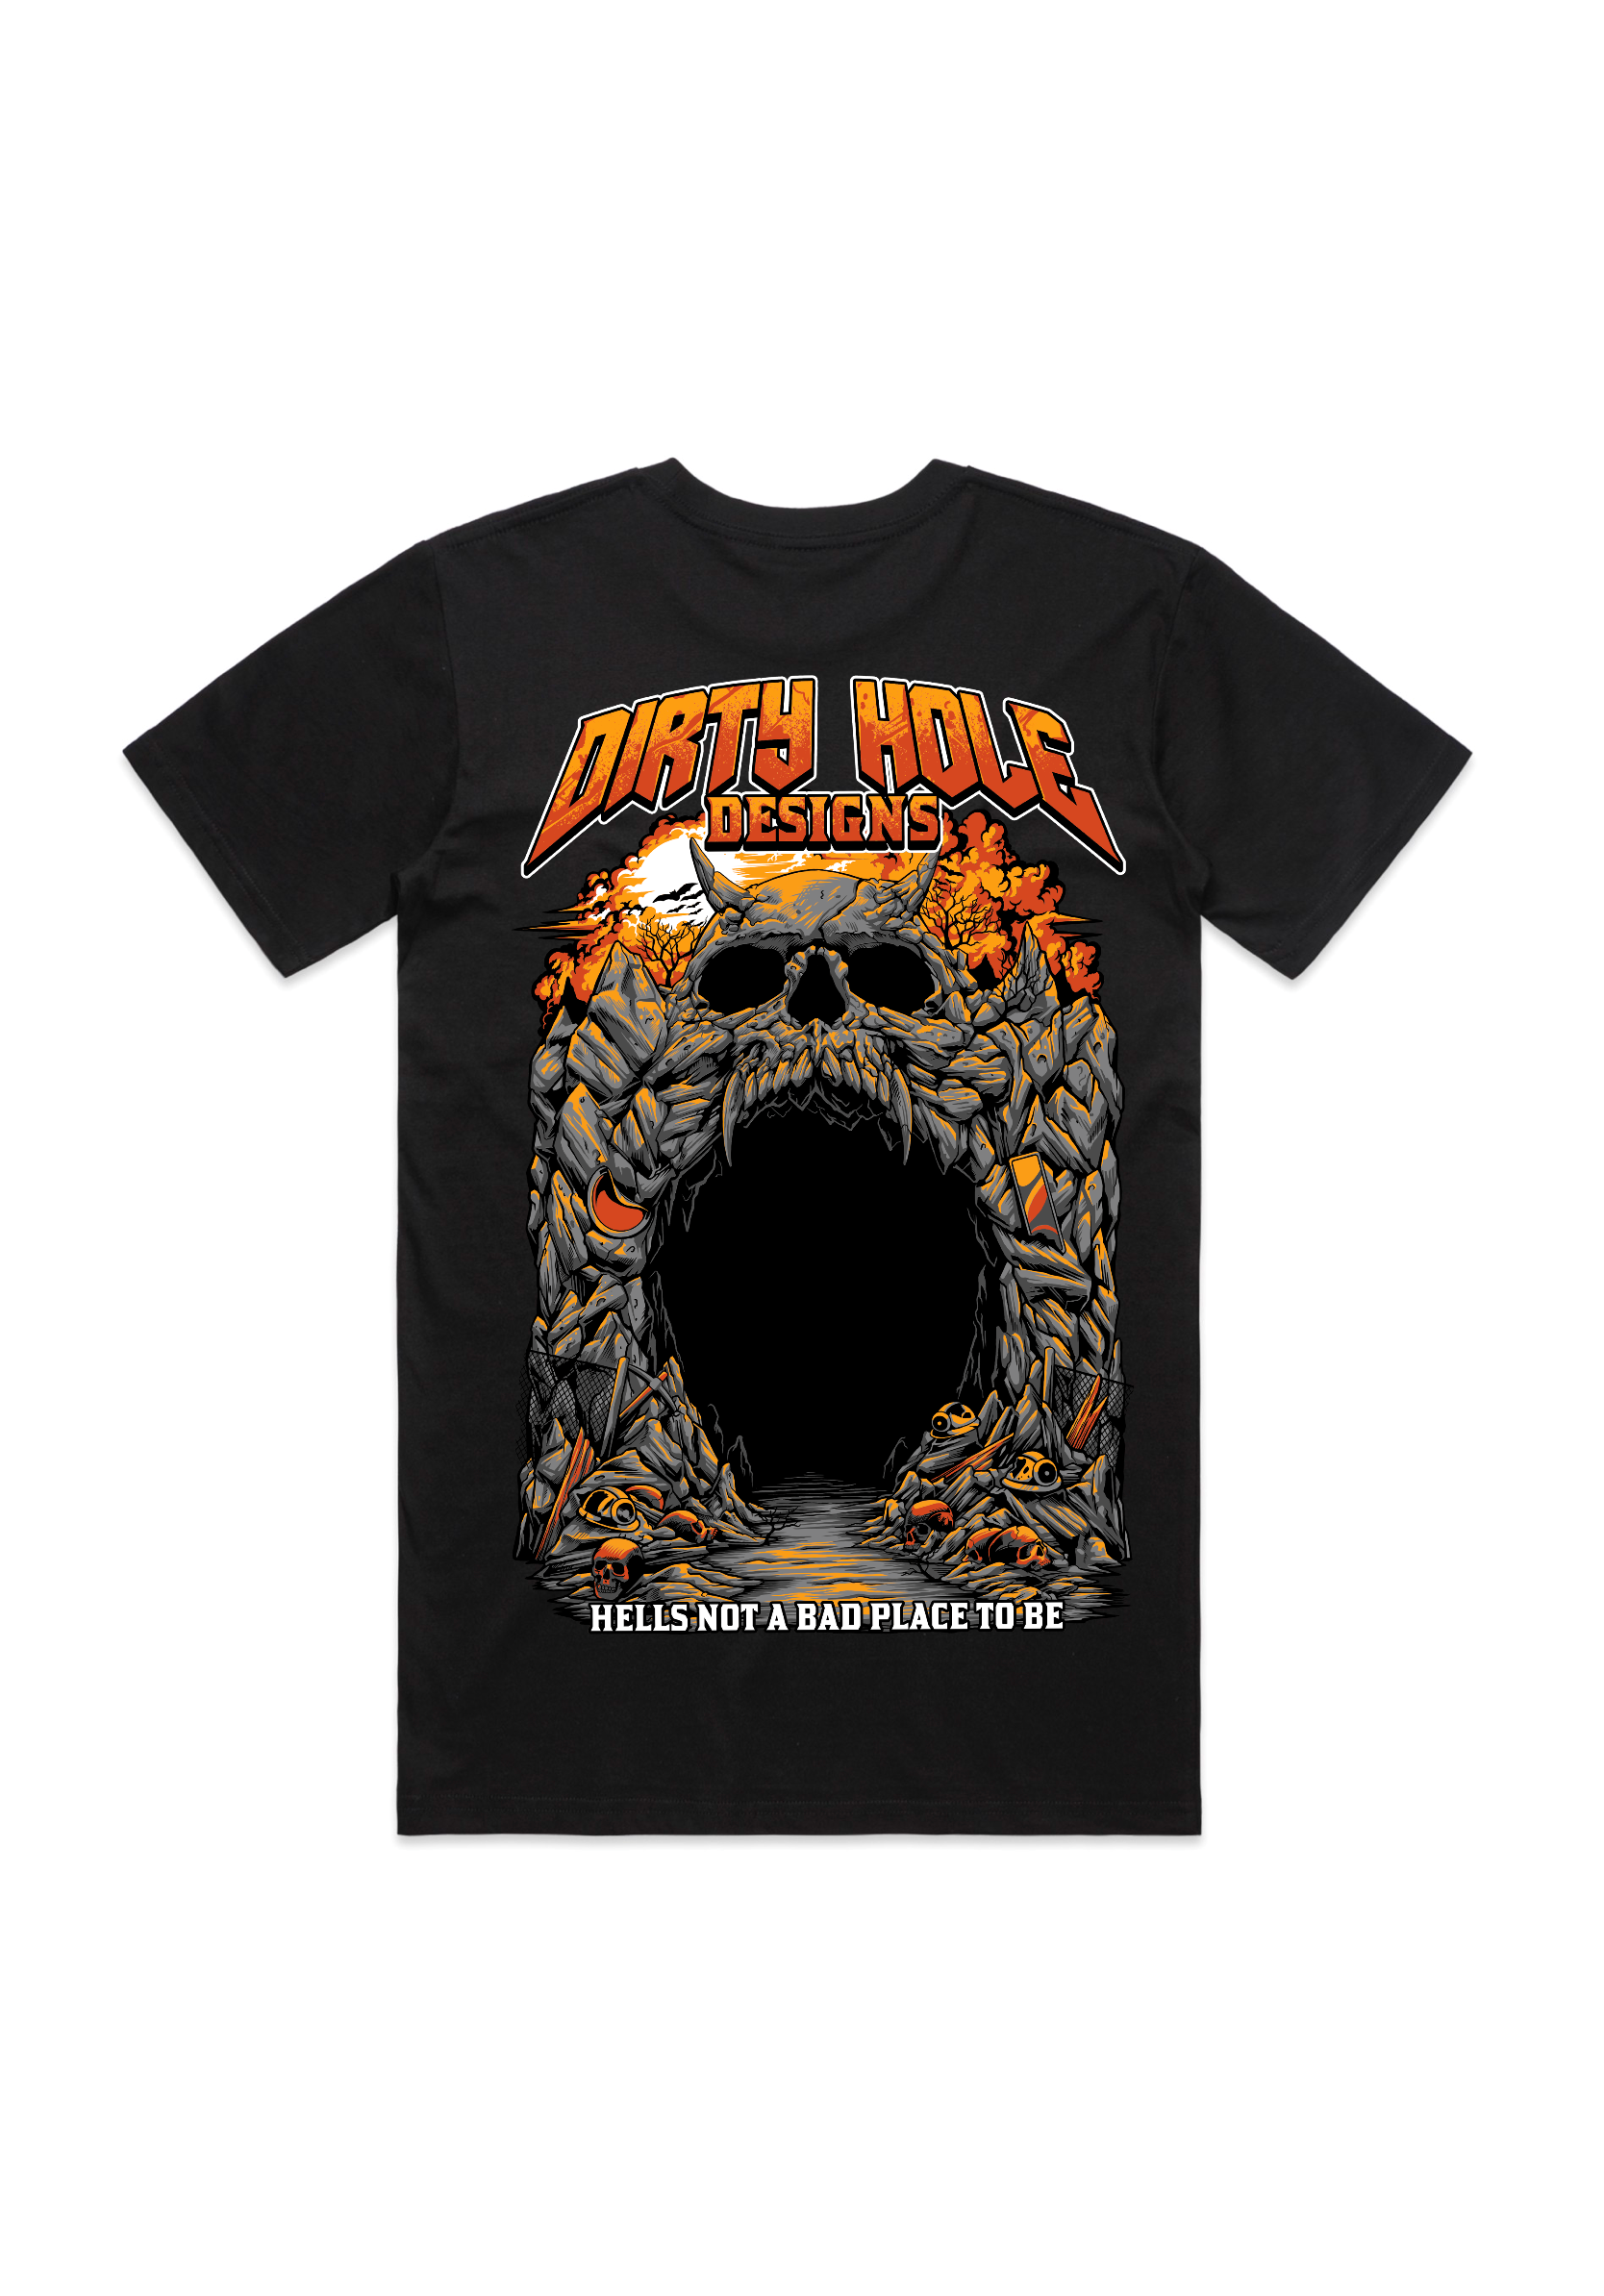 Hells Not A Bad Place To Be *mens tee